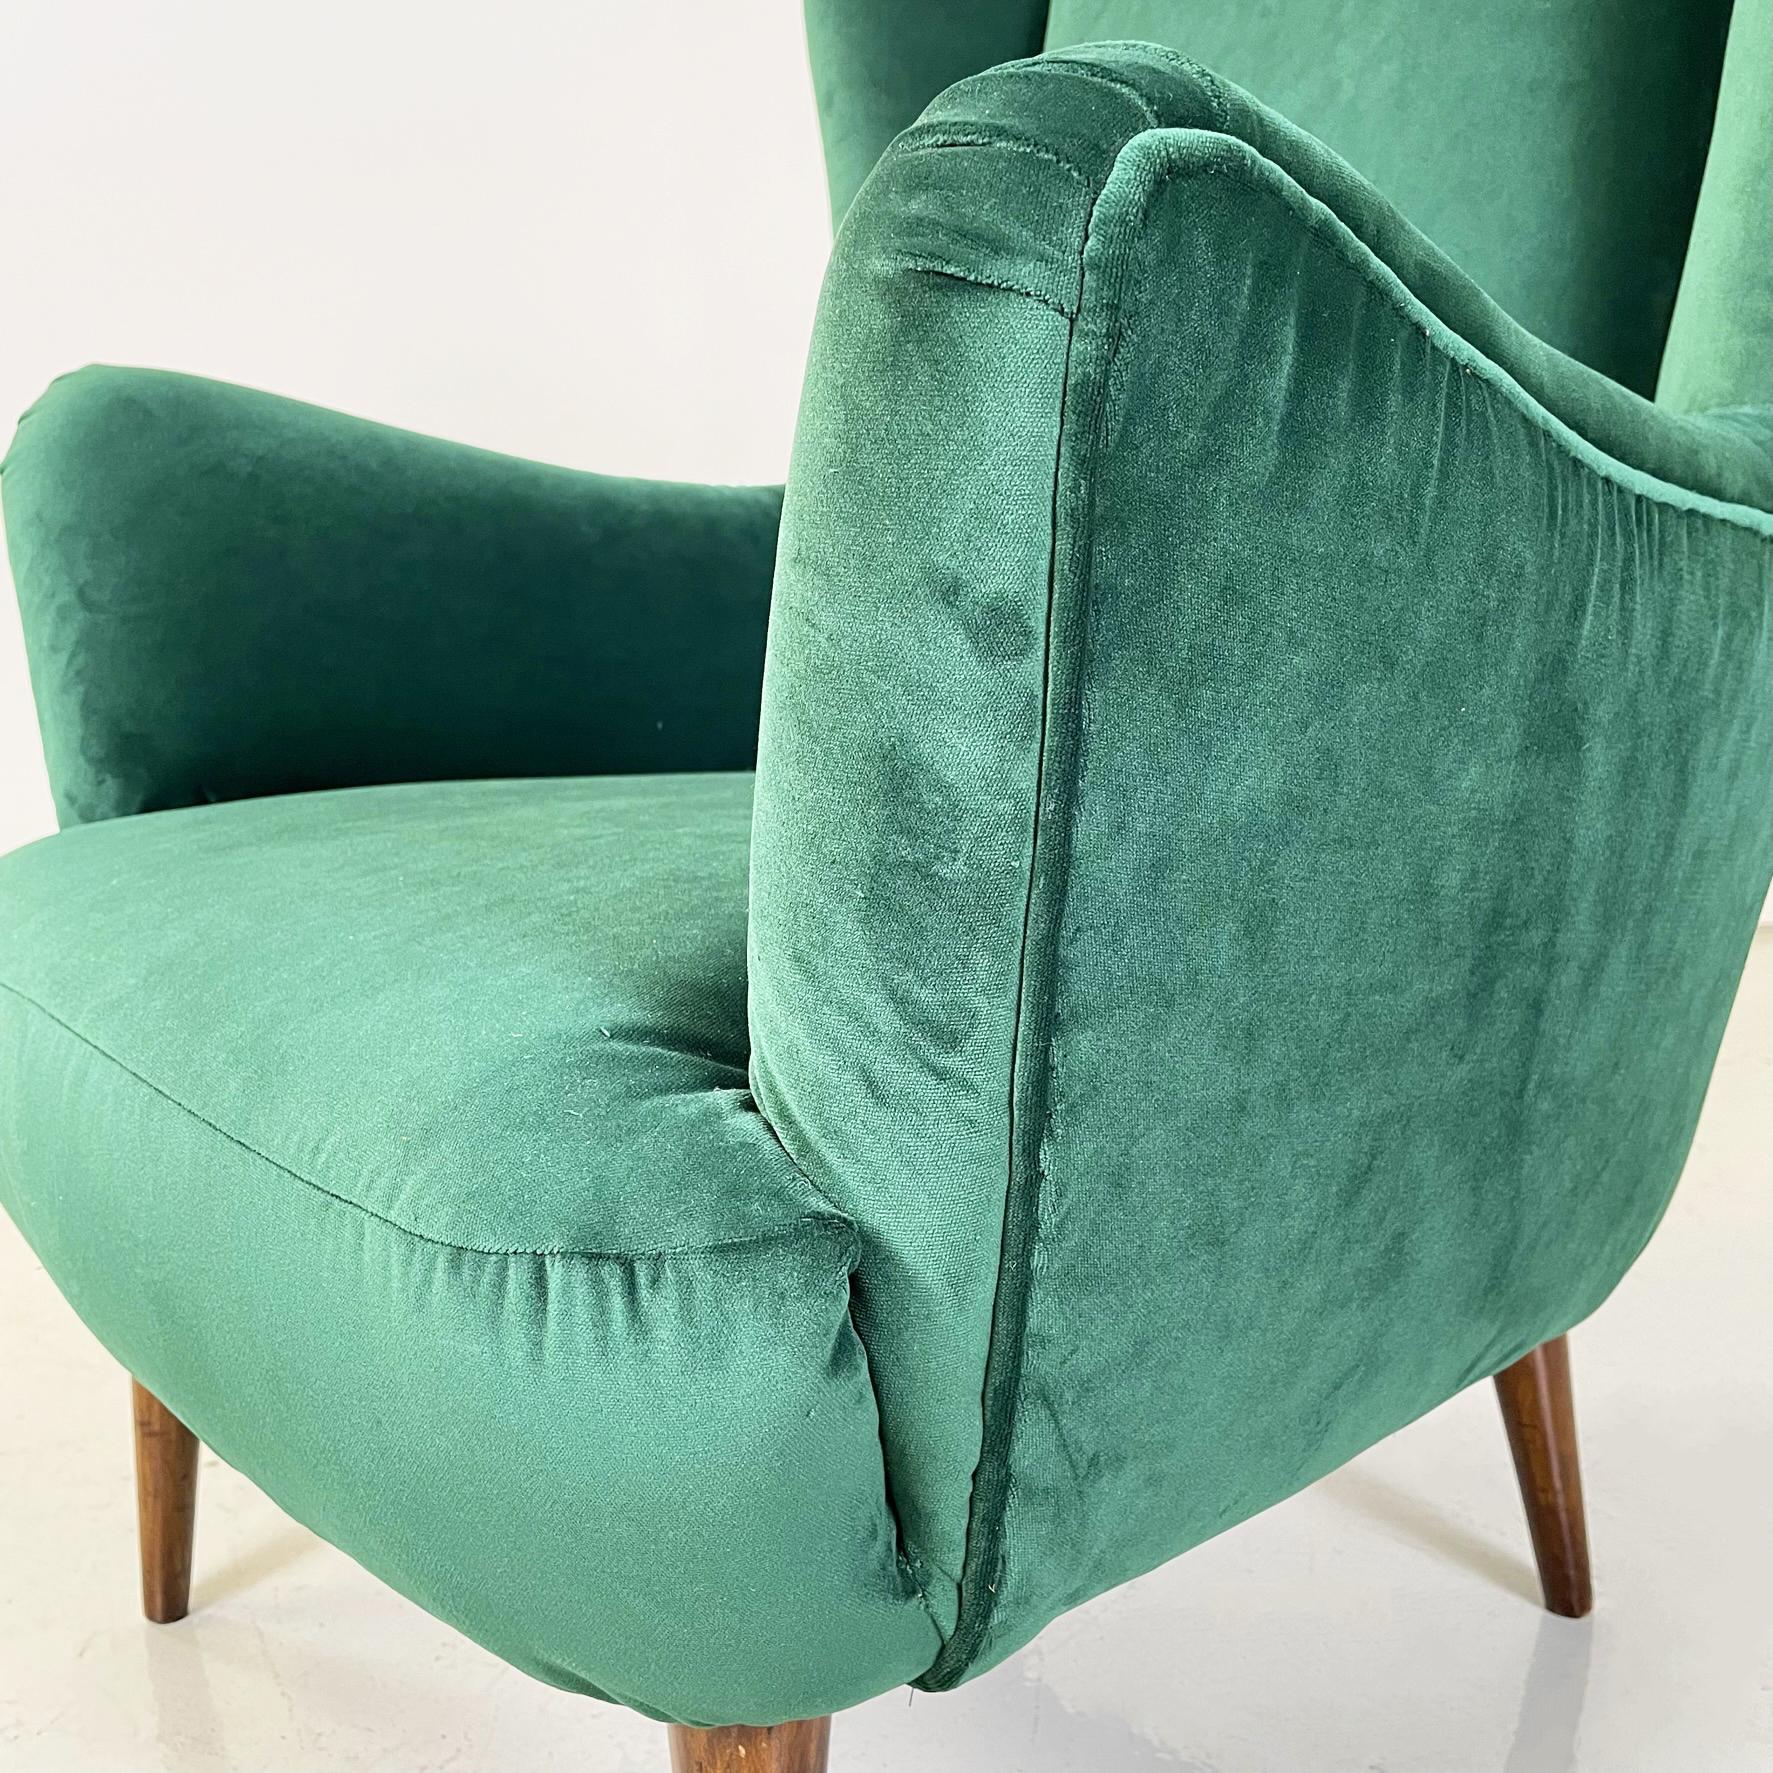 Italian Mid-Century Armchairs in Forest Green Velvet and Wooden Legs, 1950s For Sale 3